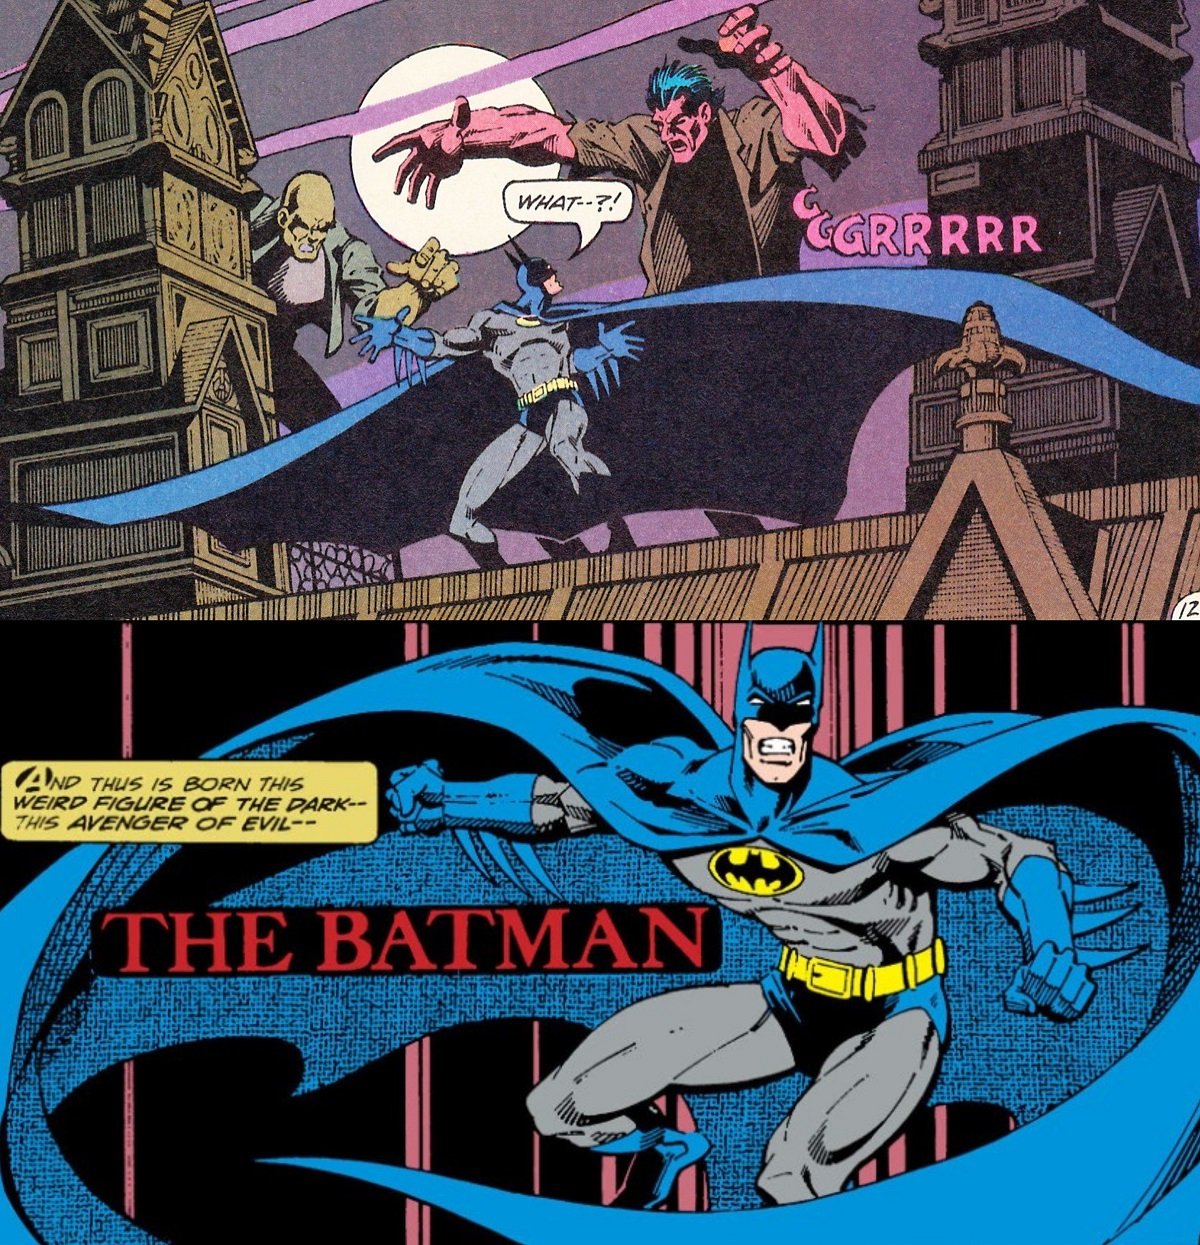 Batman art by Marshall Rogers, from his brief run on Detective Comics in 1977-78. 